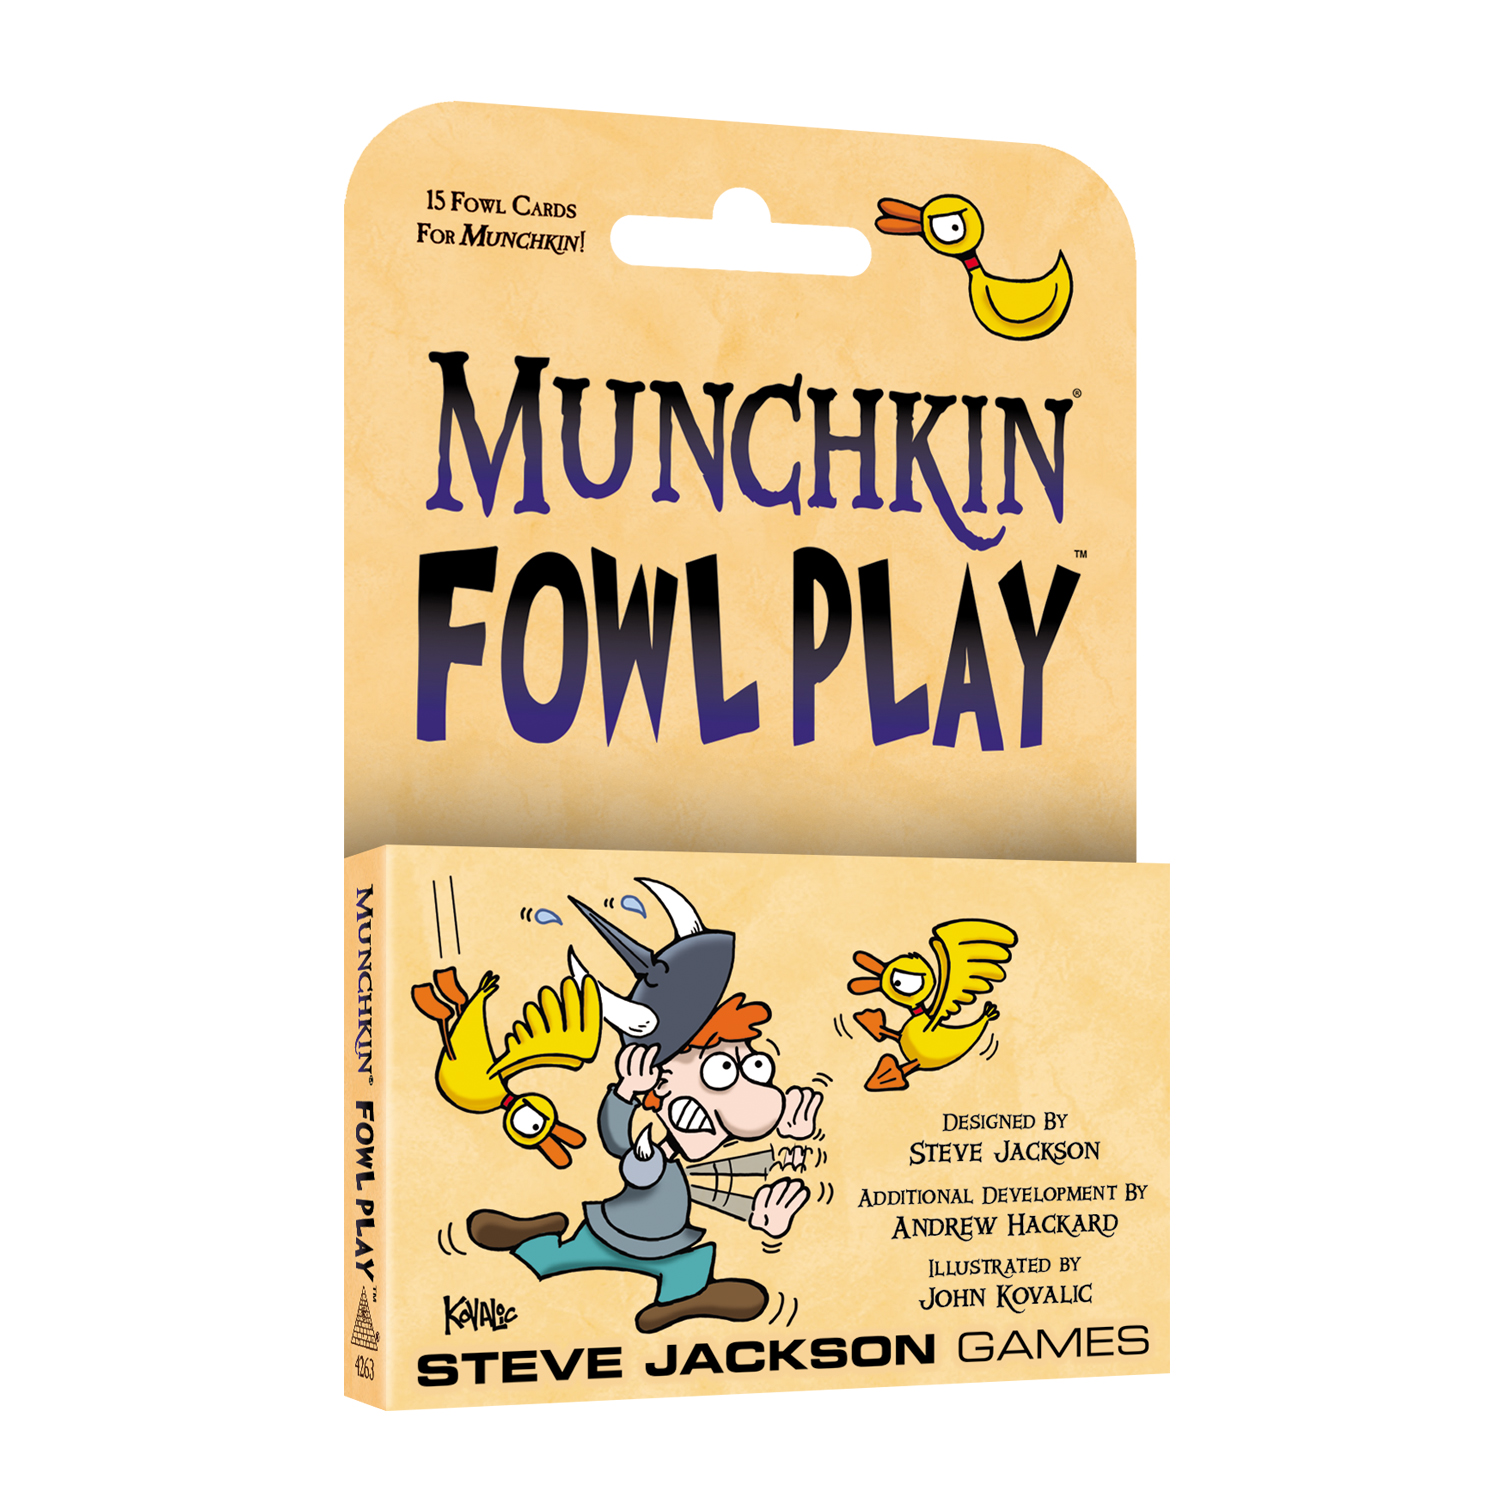 Munchkin Kobolds Ate My Baby Card Game Booster Adds 15 Cards Steve Jackson Games 